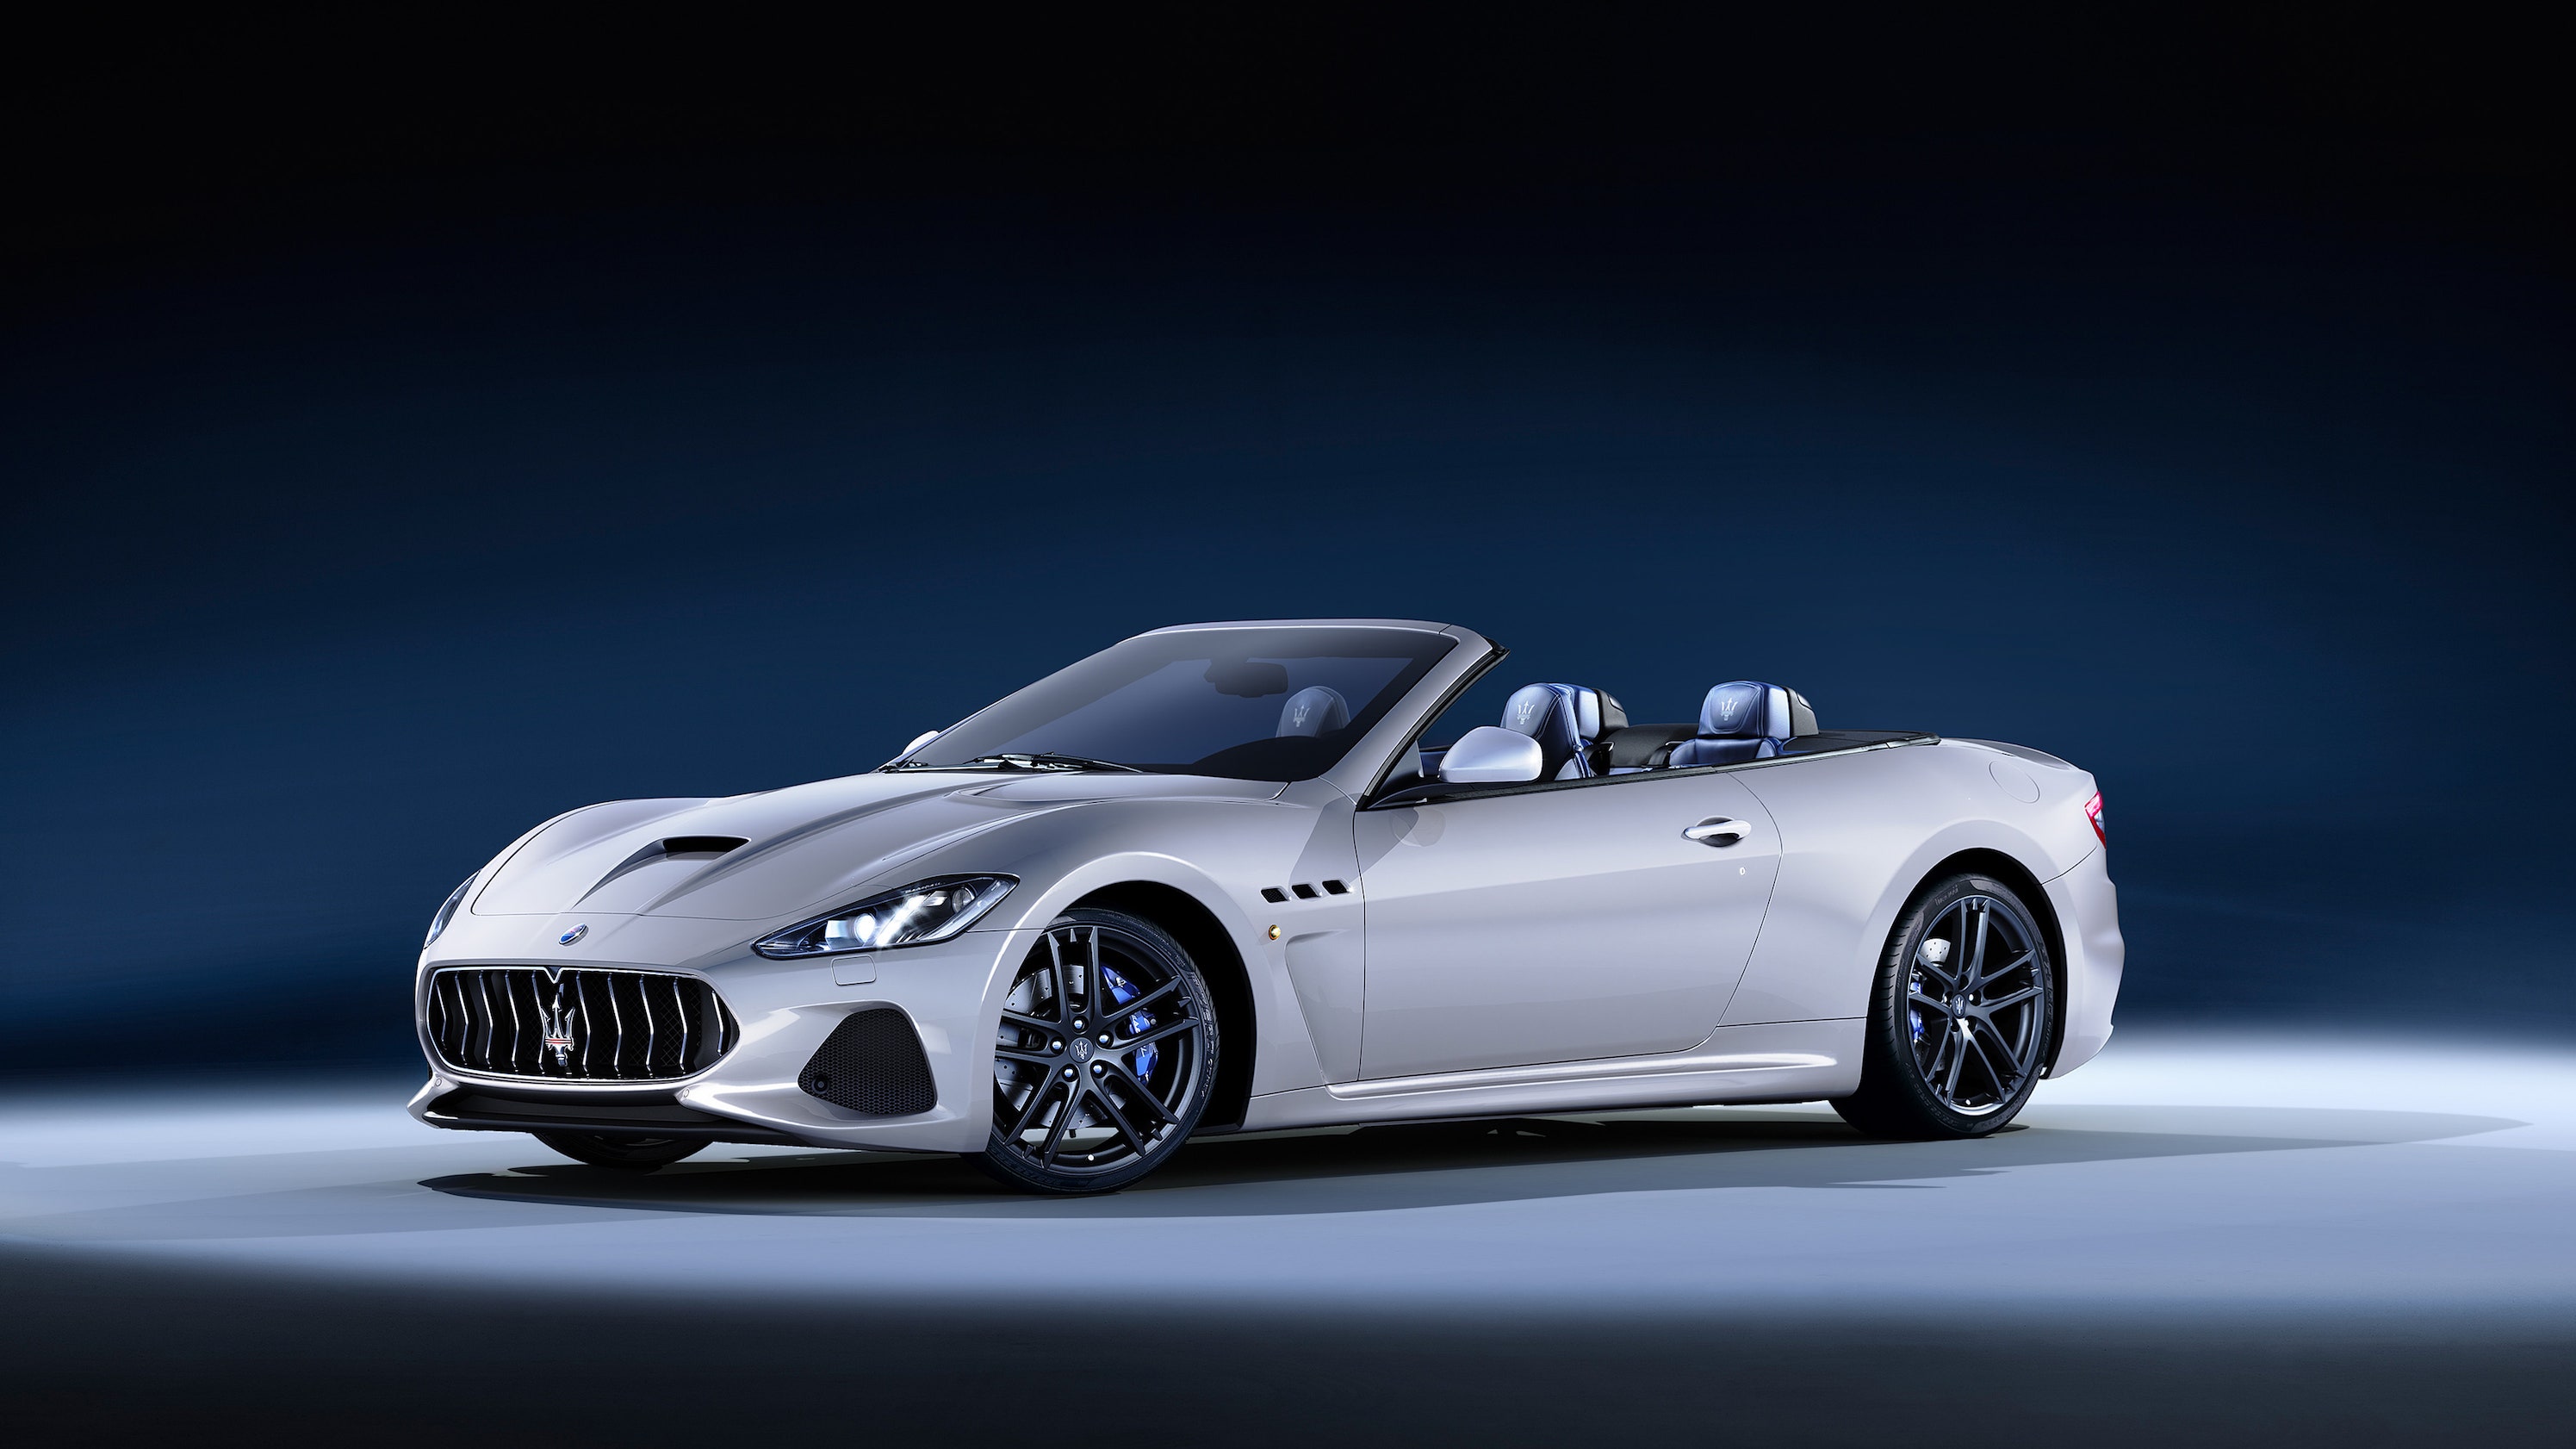 Maserati Unveils Their Stunning New GranTurismo Coupe and Convertible |  Architectural Digest